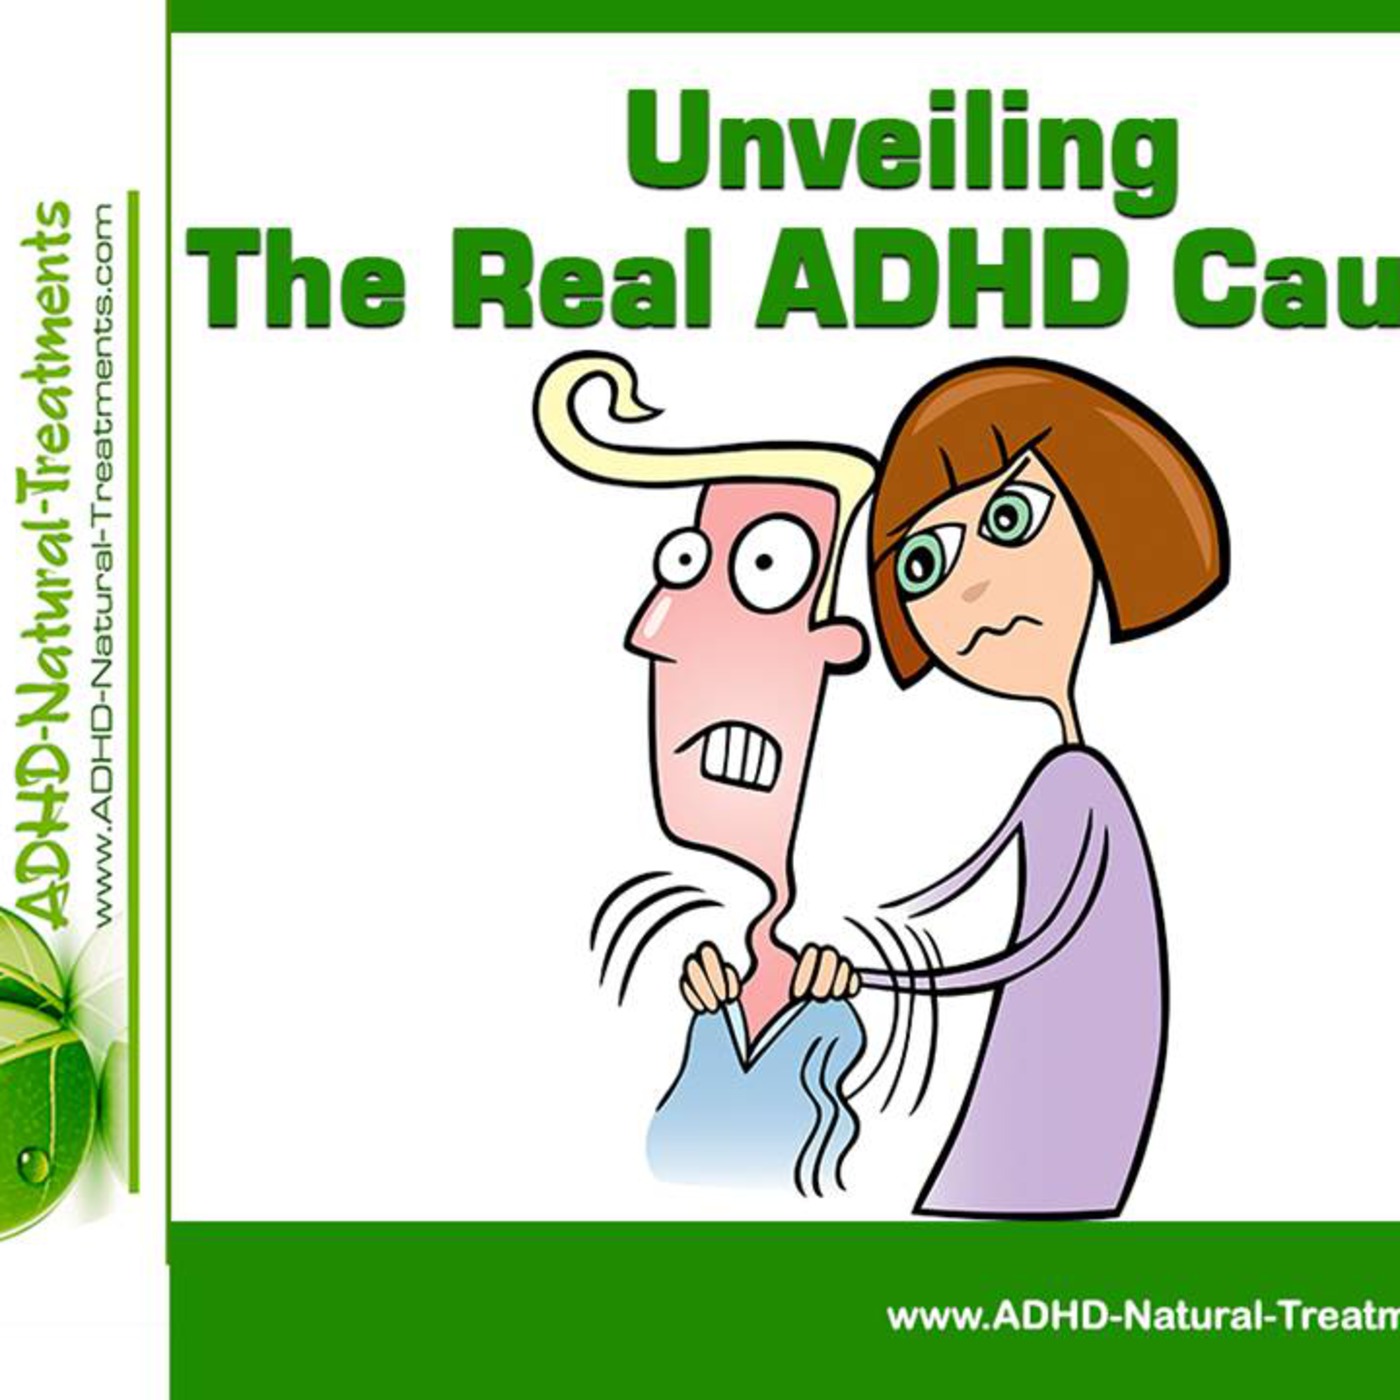 Real ADHD Causes - ADHD Cause - Cause Of ADHD